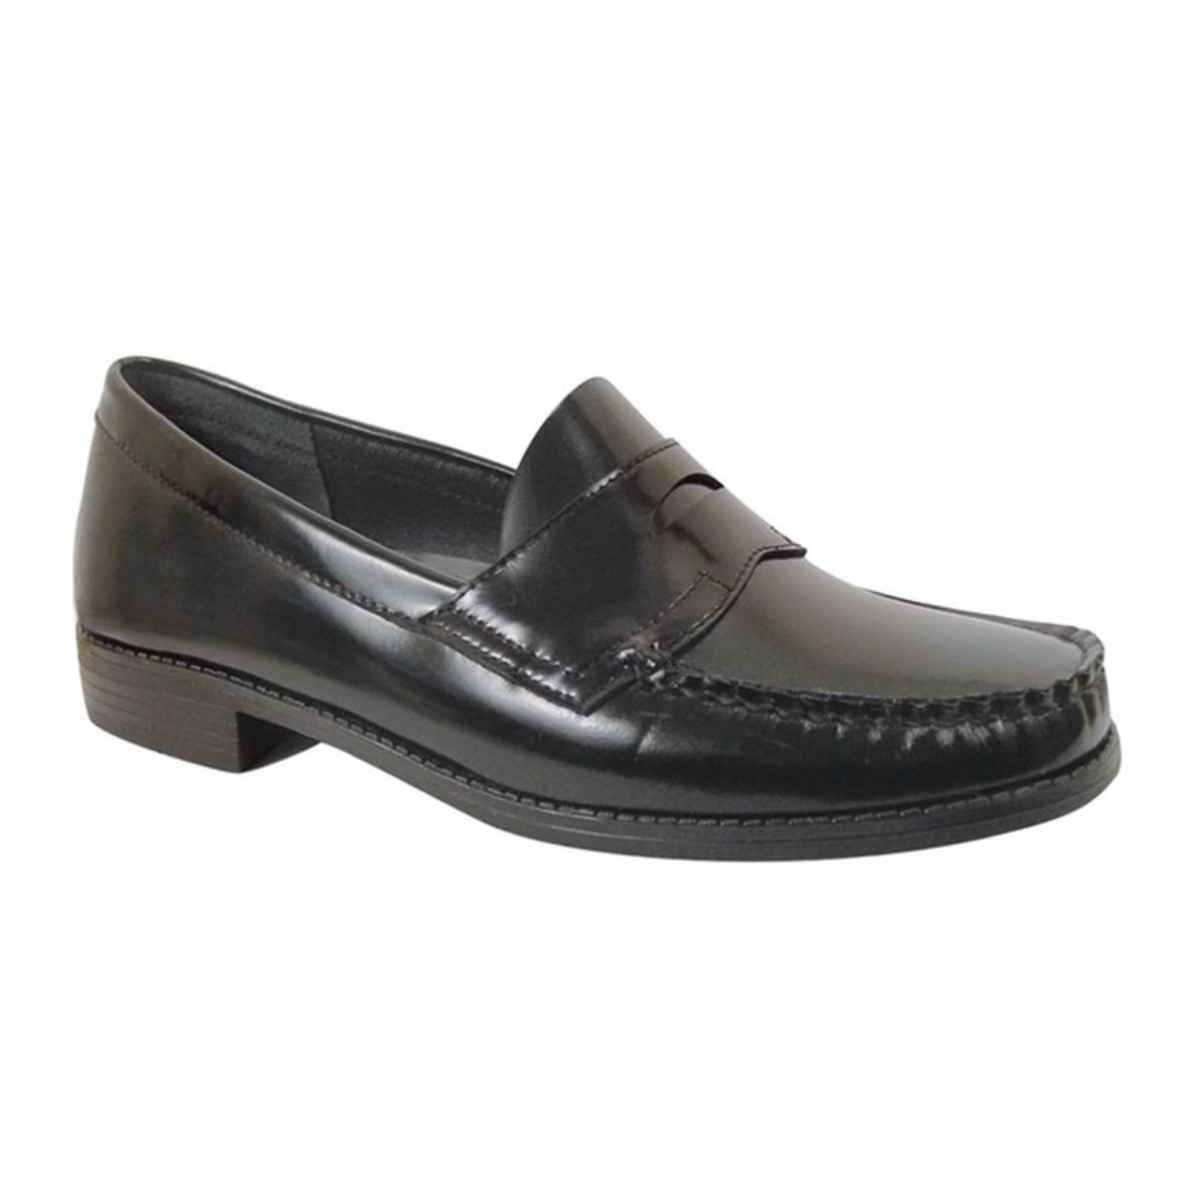 border Seminary building Ivy Women's Black Leather Penny Loafers - Kids Shoe Box